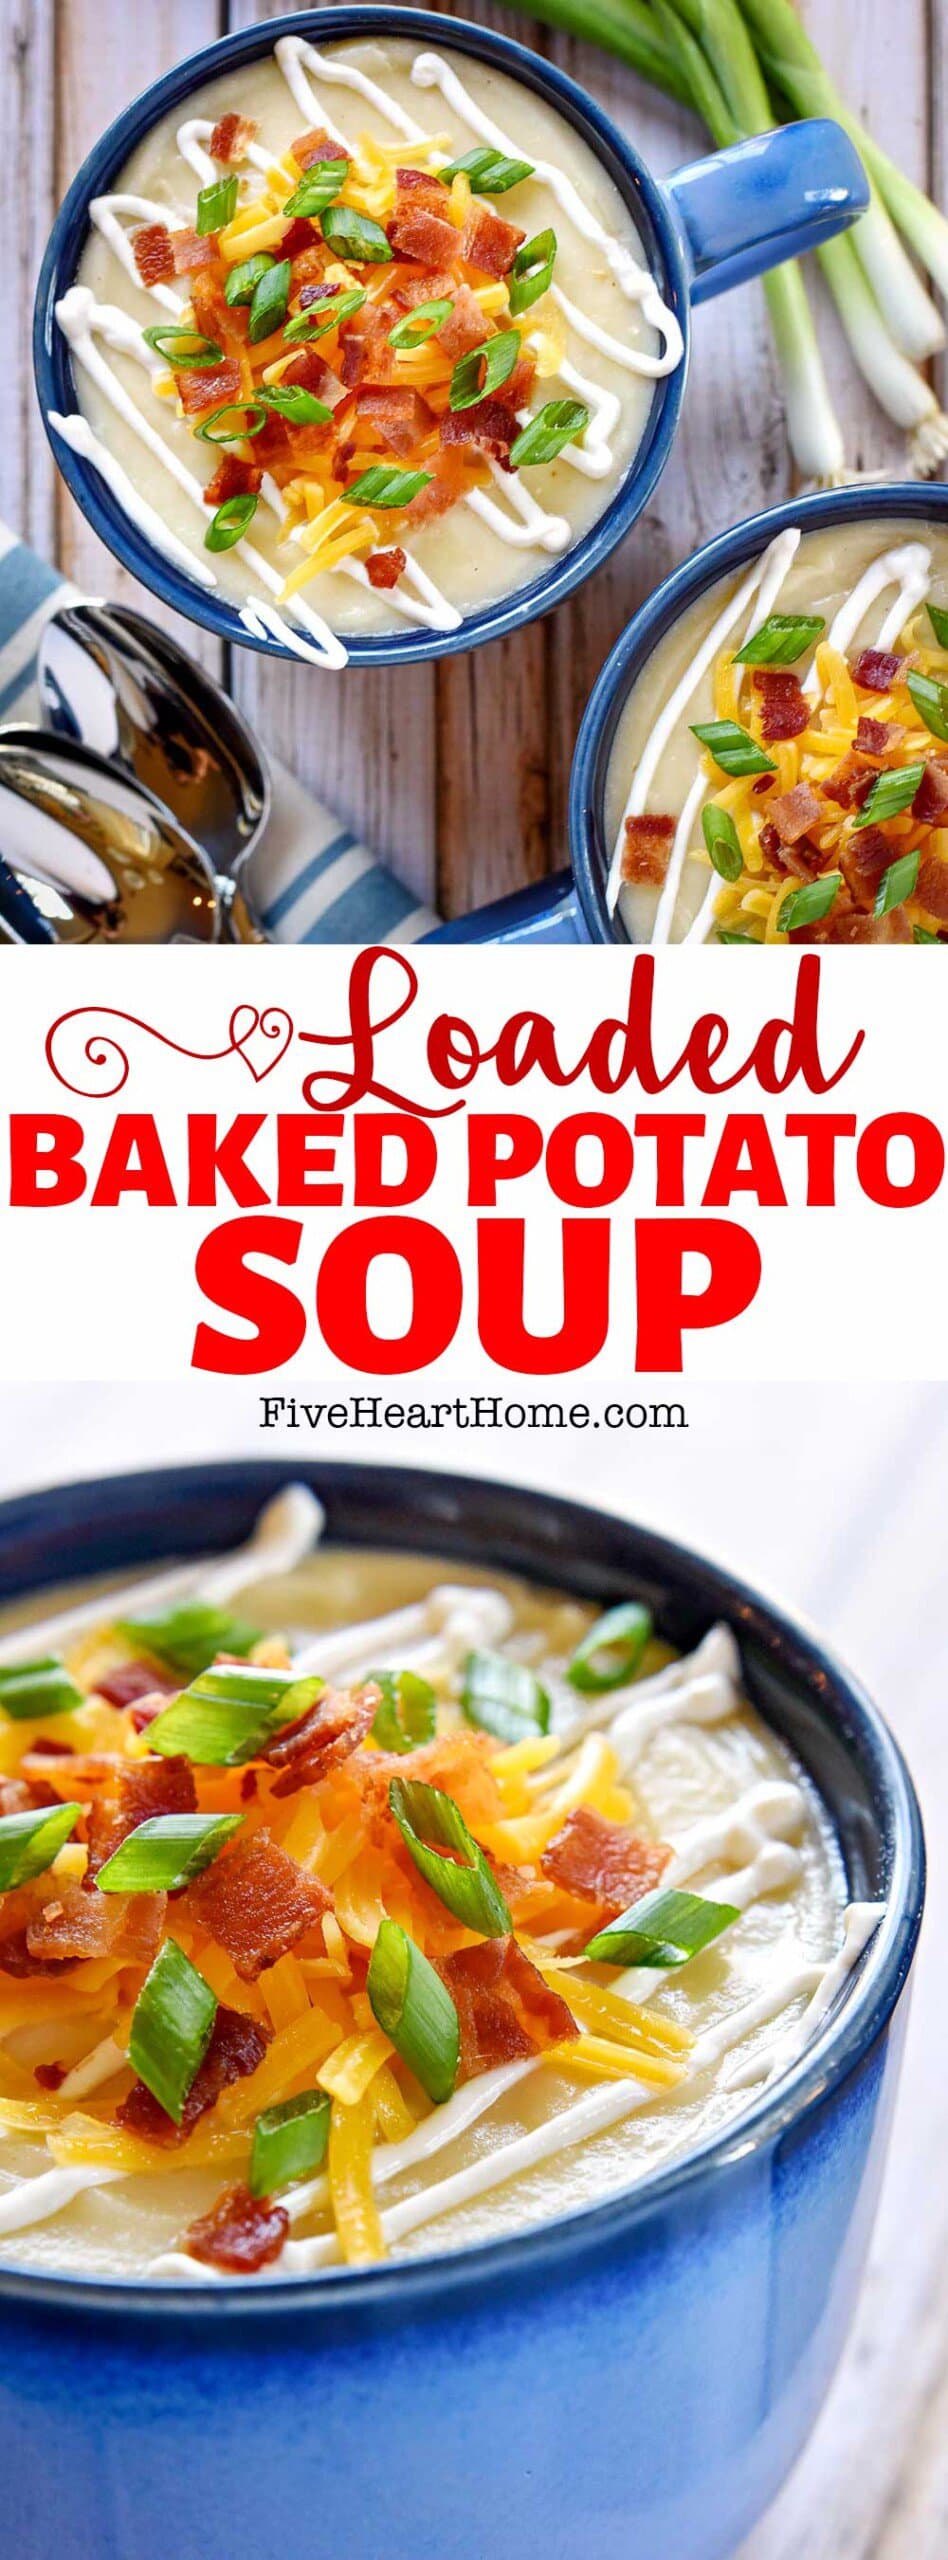 Loaded Baked Potato Soup ~ a smooth and creamy soup made on the stovetop or in the crock pot and then garnished with a variety of tasty traditional baked potato toppings, from sour cream and shredded cheese to crispy bacon and green onions! | FiveHeartHome.com via @fivehearthome